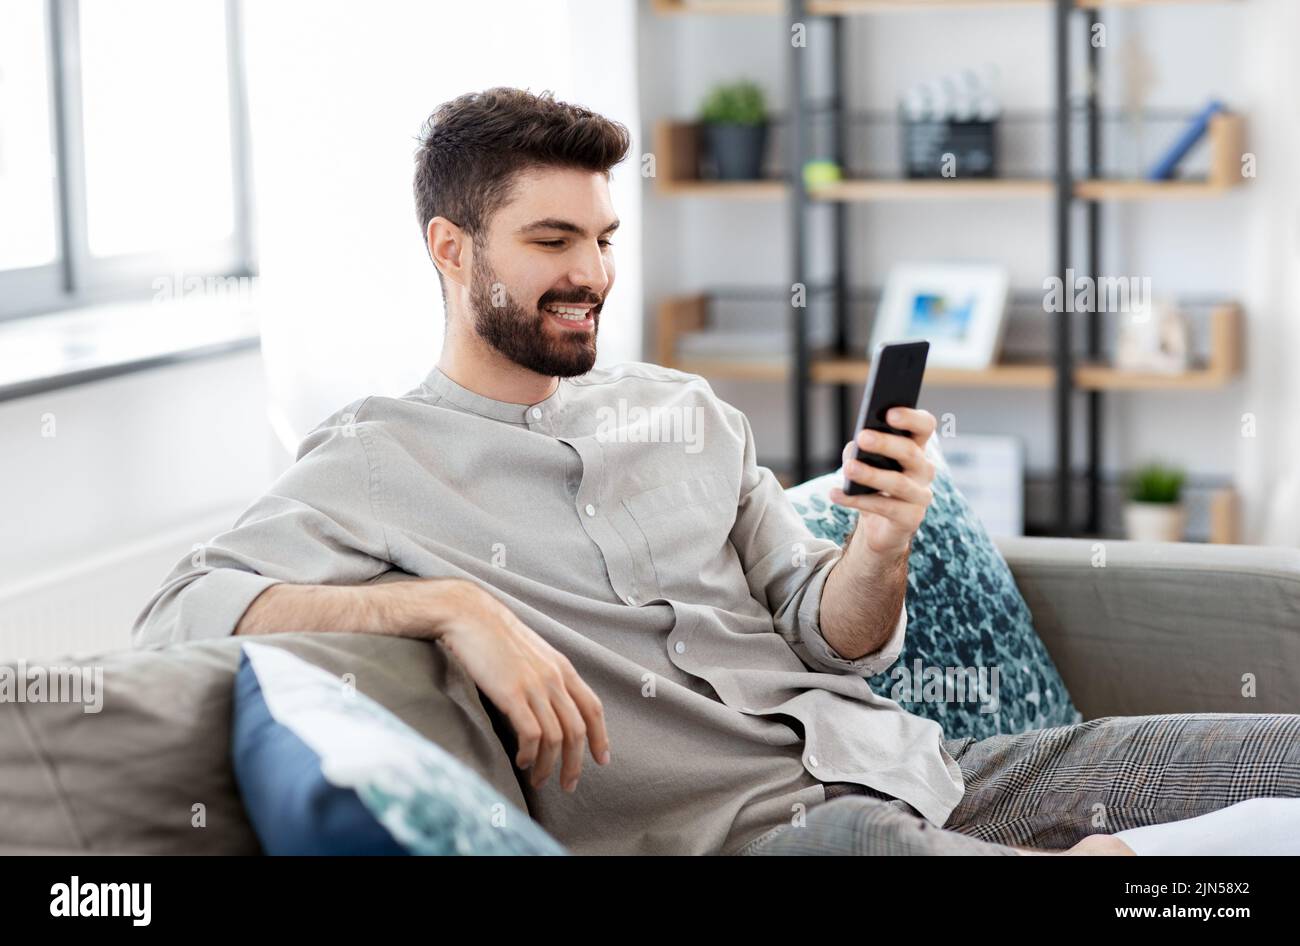 happy smiling young man with smartphone at home Stock Photo